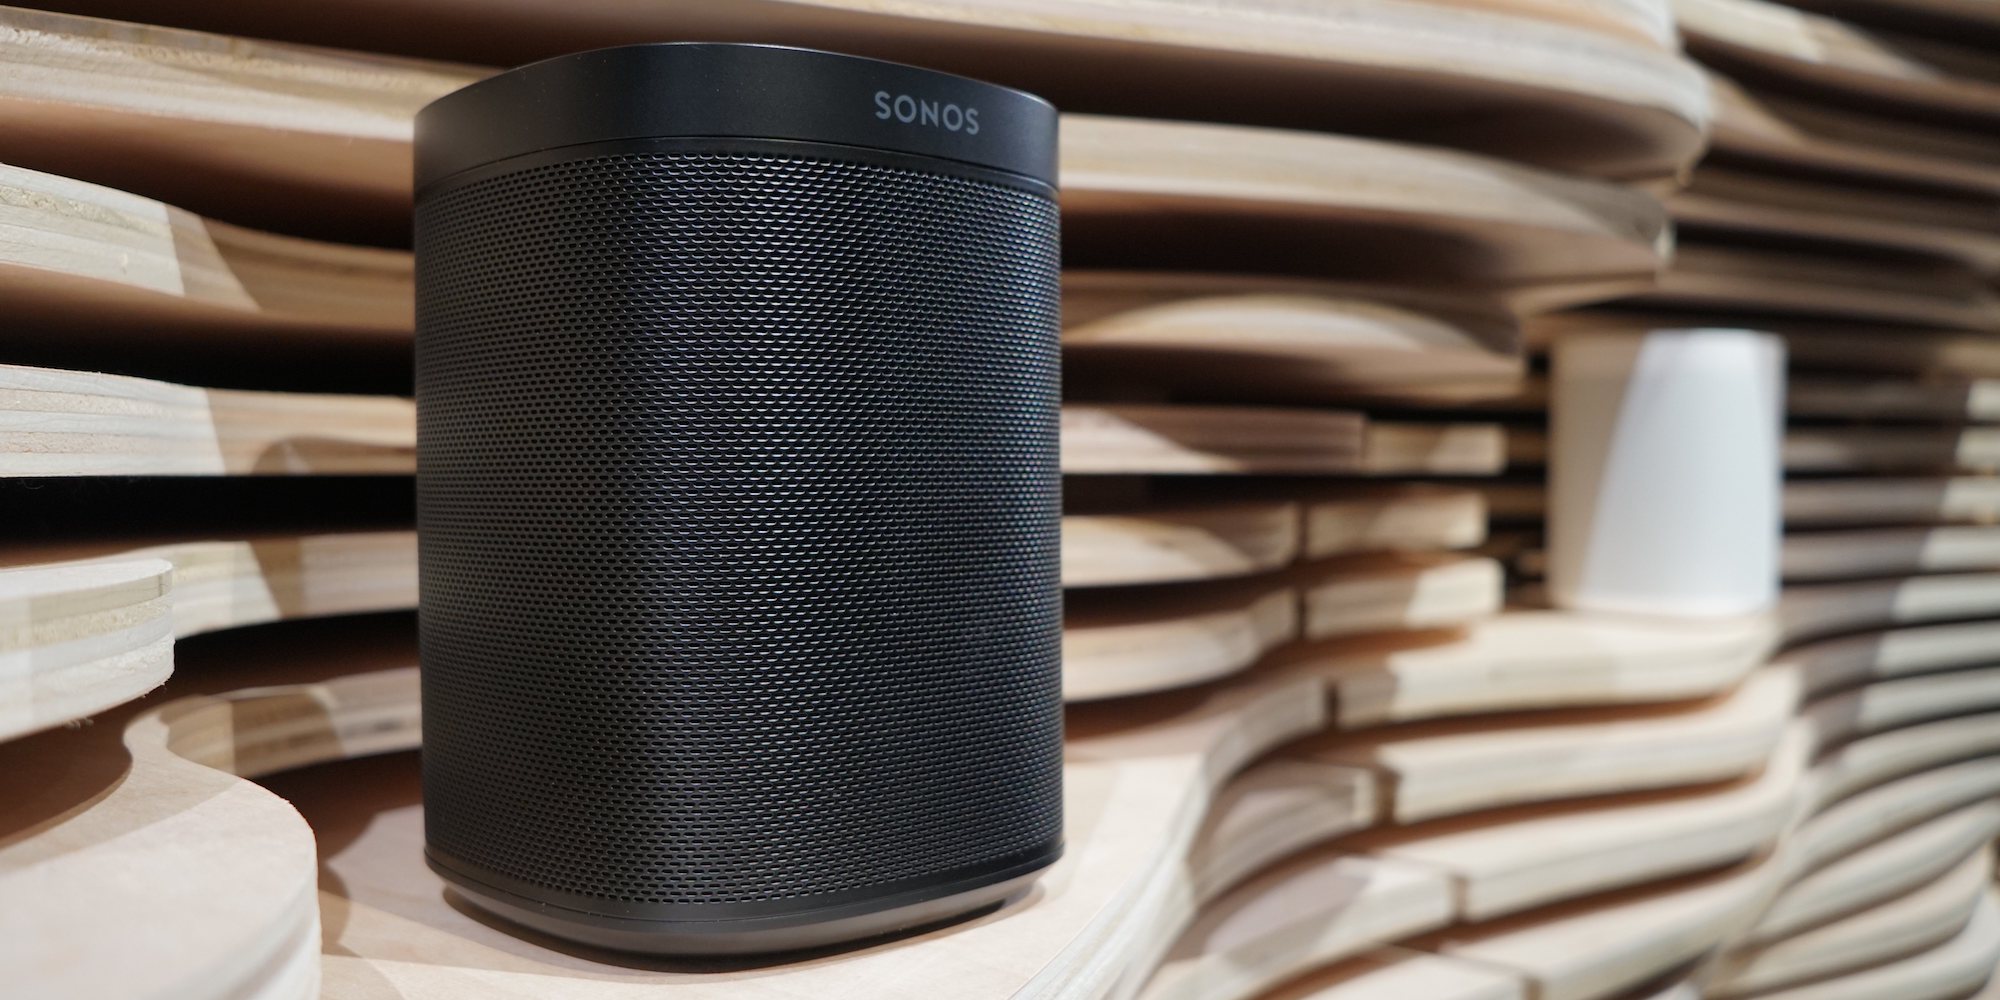 Sonos co-founder former CEO praises HomePod sound quality, but says Spotify support needed - 9to5Mac